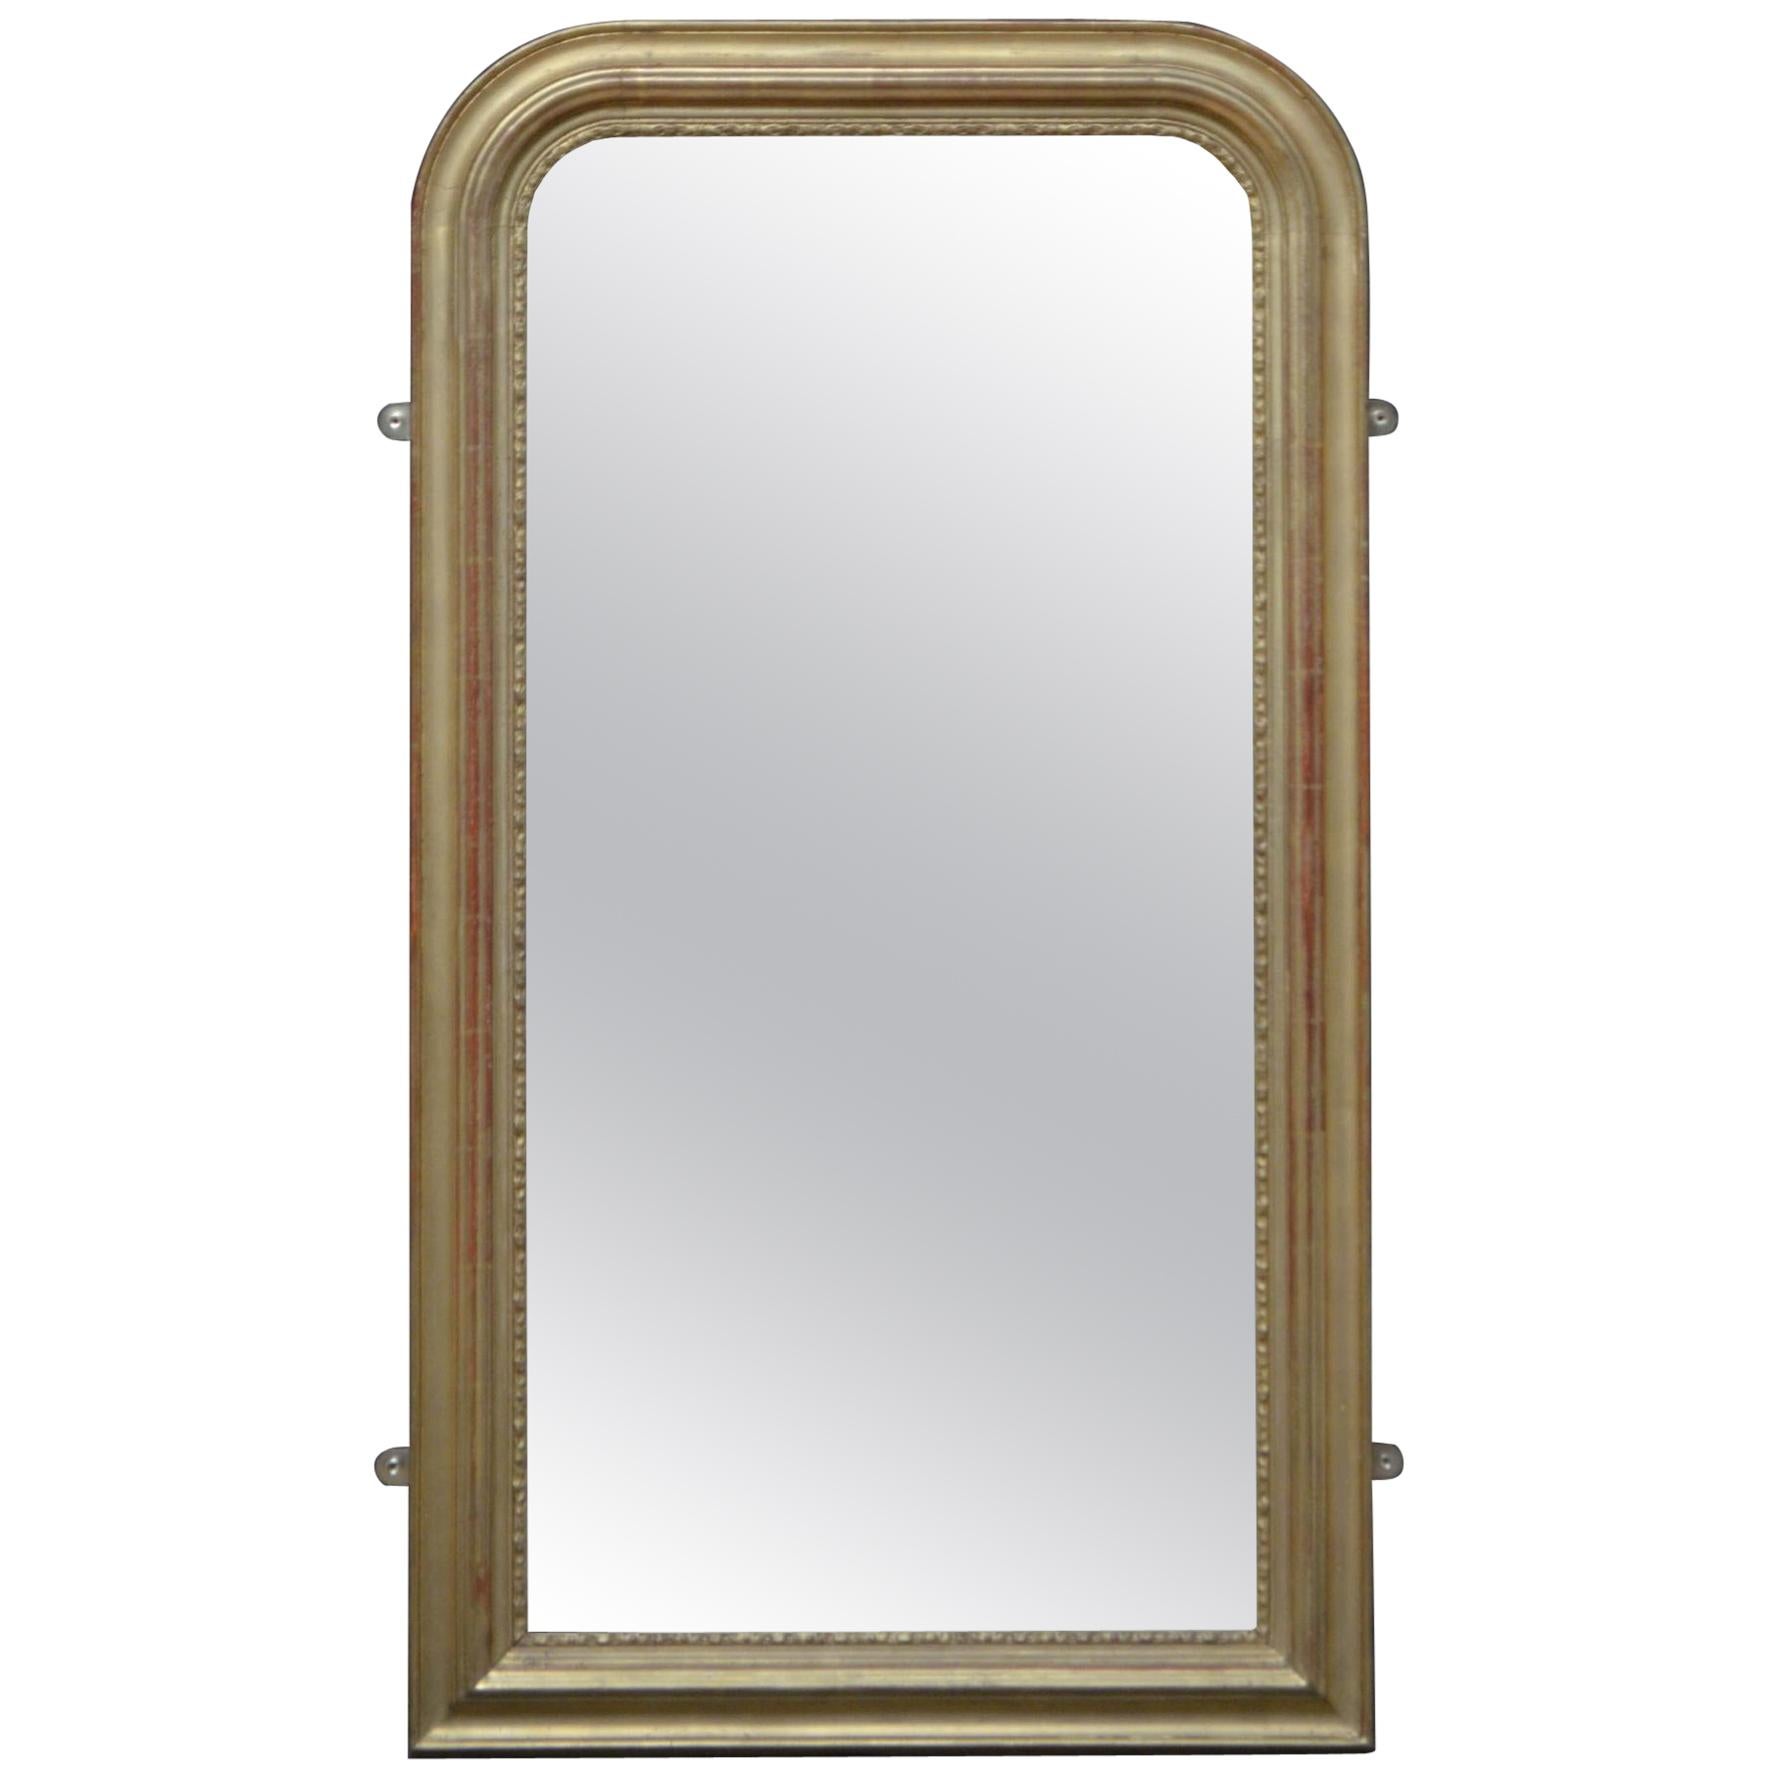 Louis Philippe Giltwood Pier Mirror for sale at Pamono